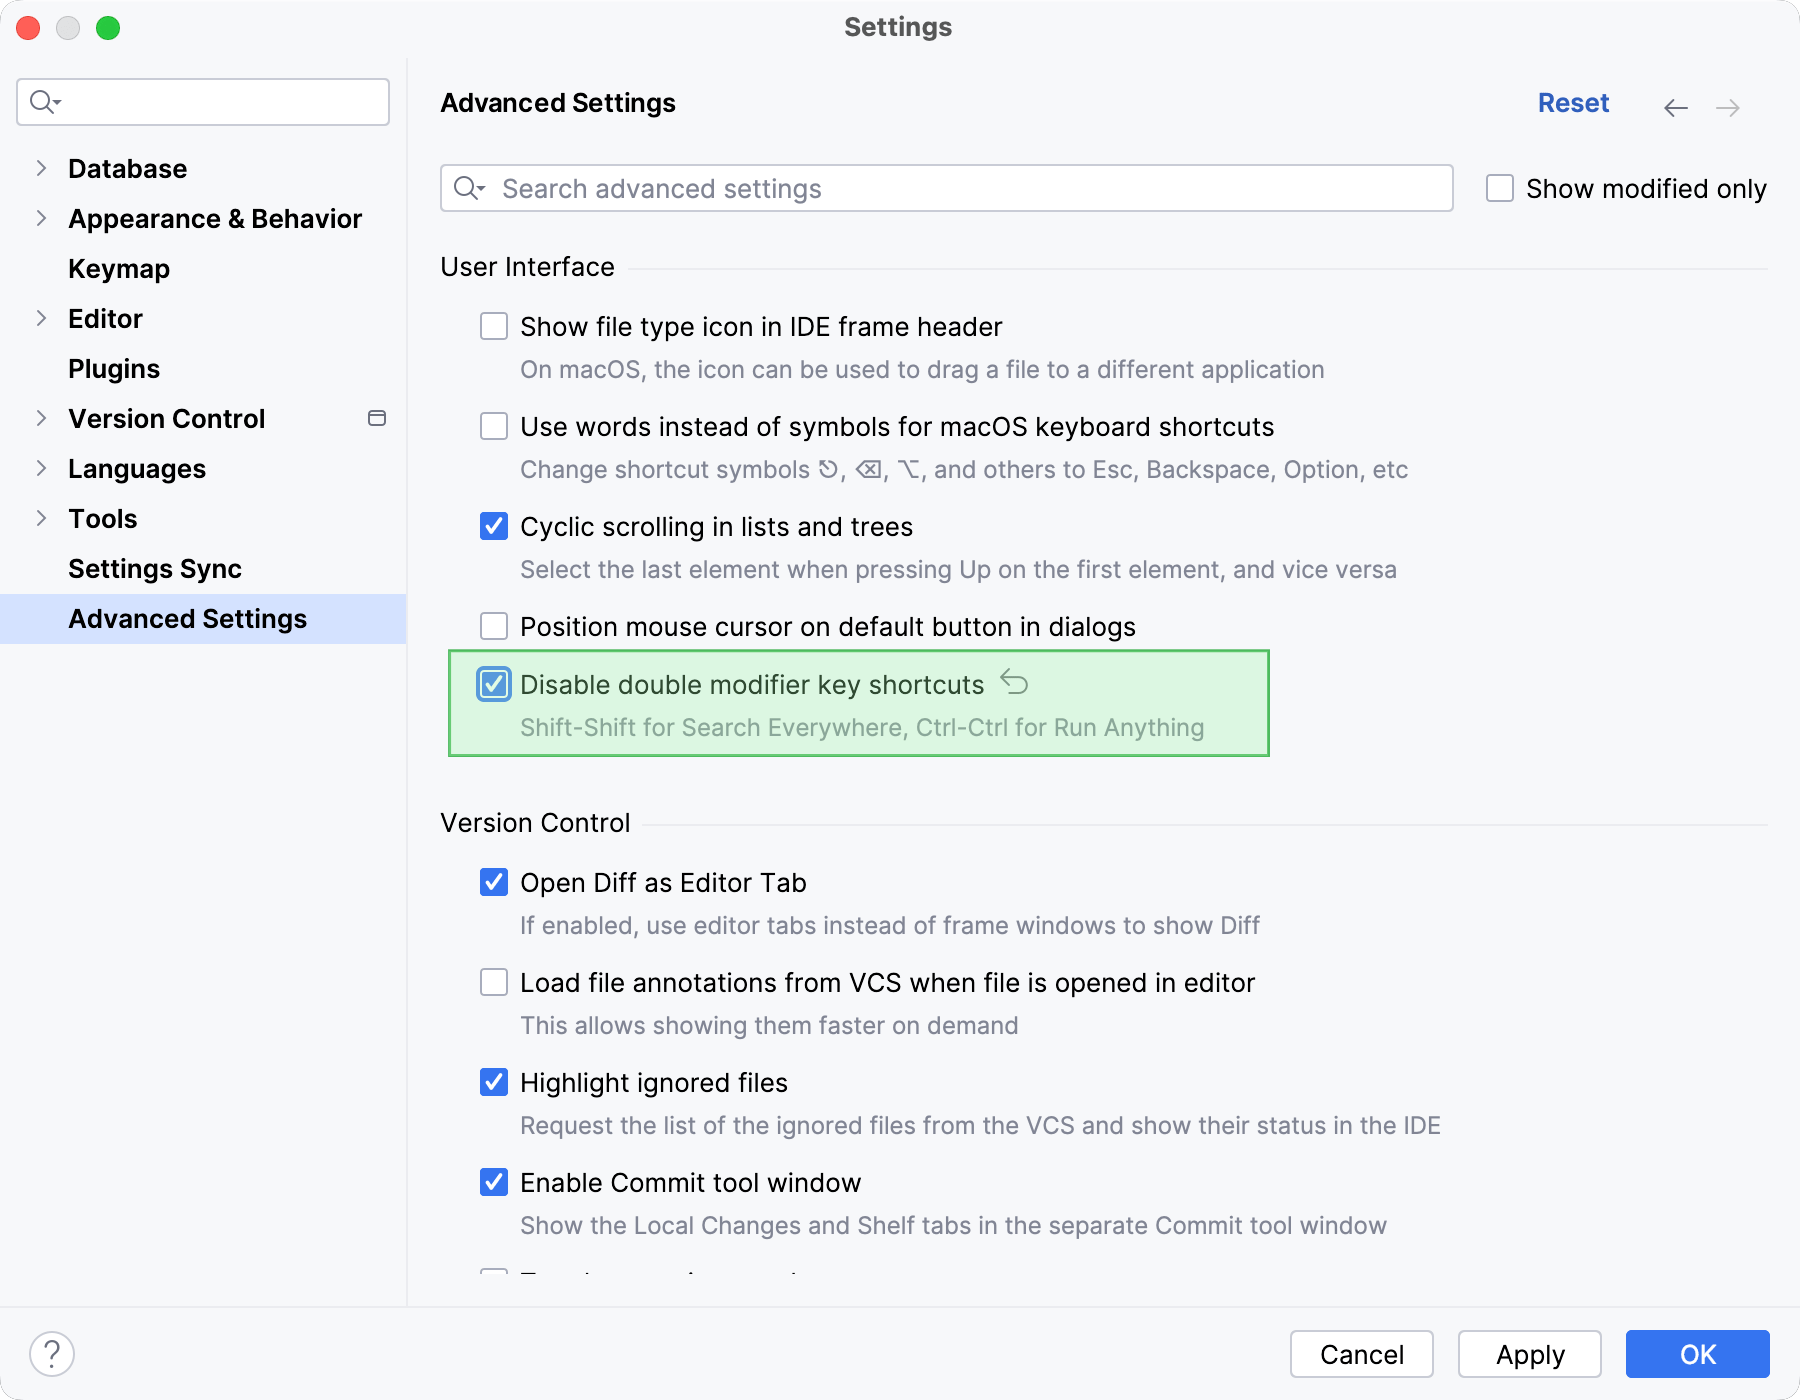 Disabling the double-key shortcuts